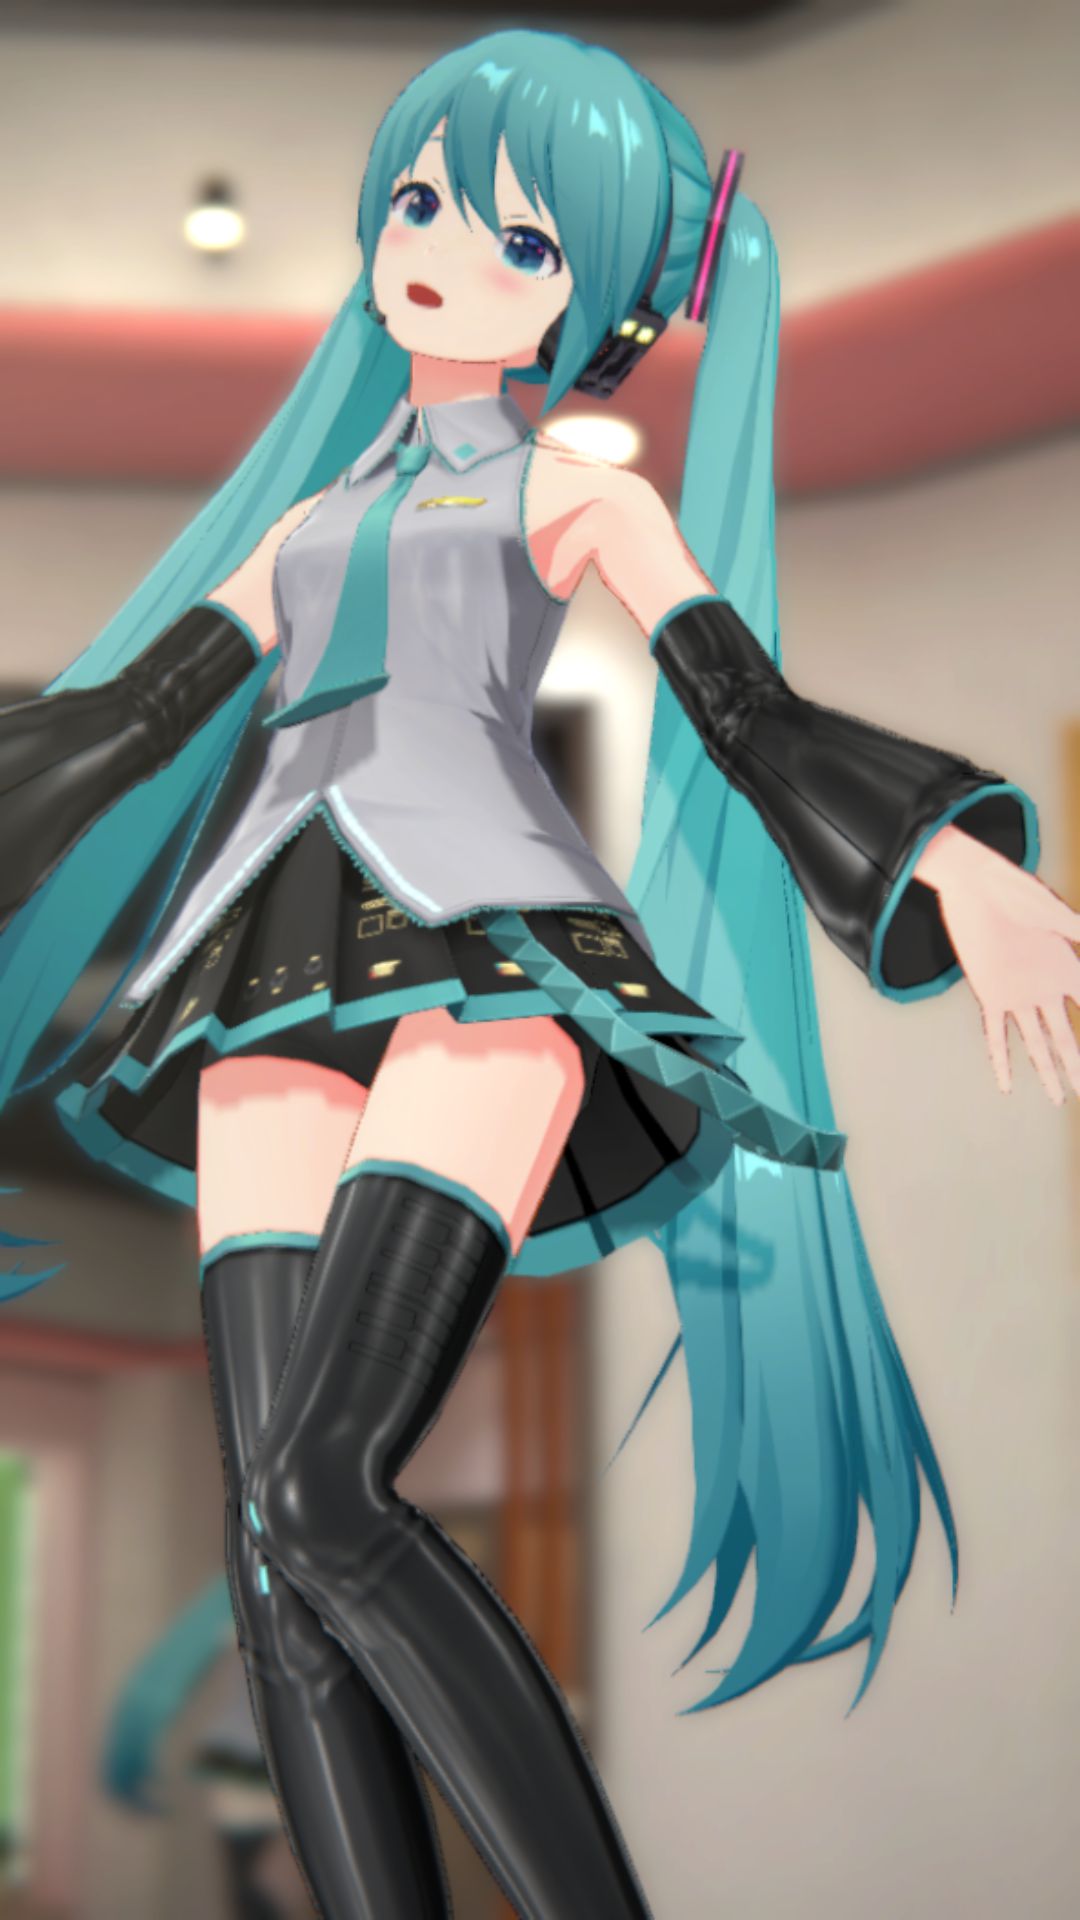 The result of peeking into the contents of the skirt of the smartphone game "IDOLY PRIDE" Hatsune Miku and Hatsune Miku costume 16